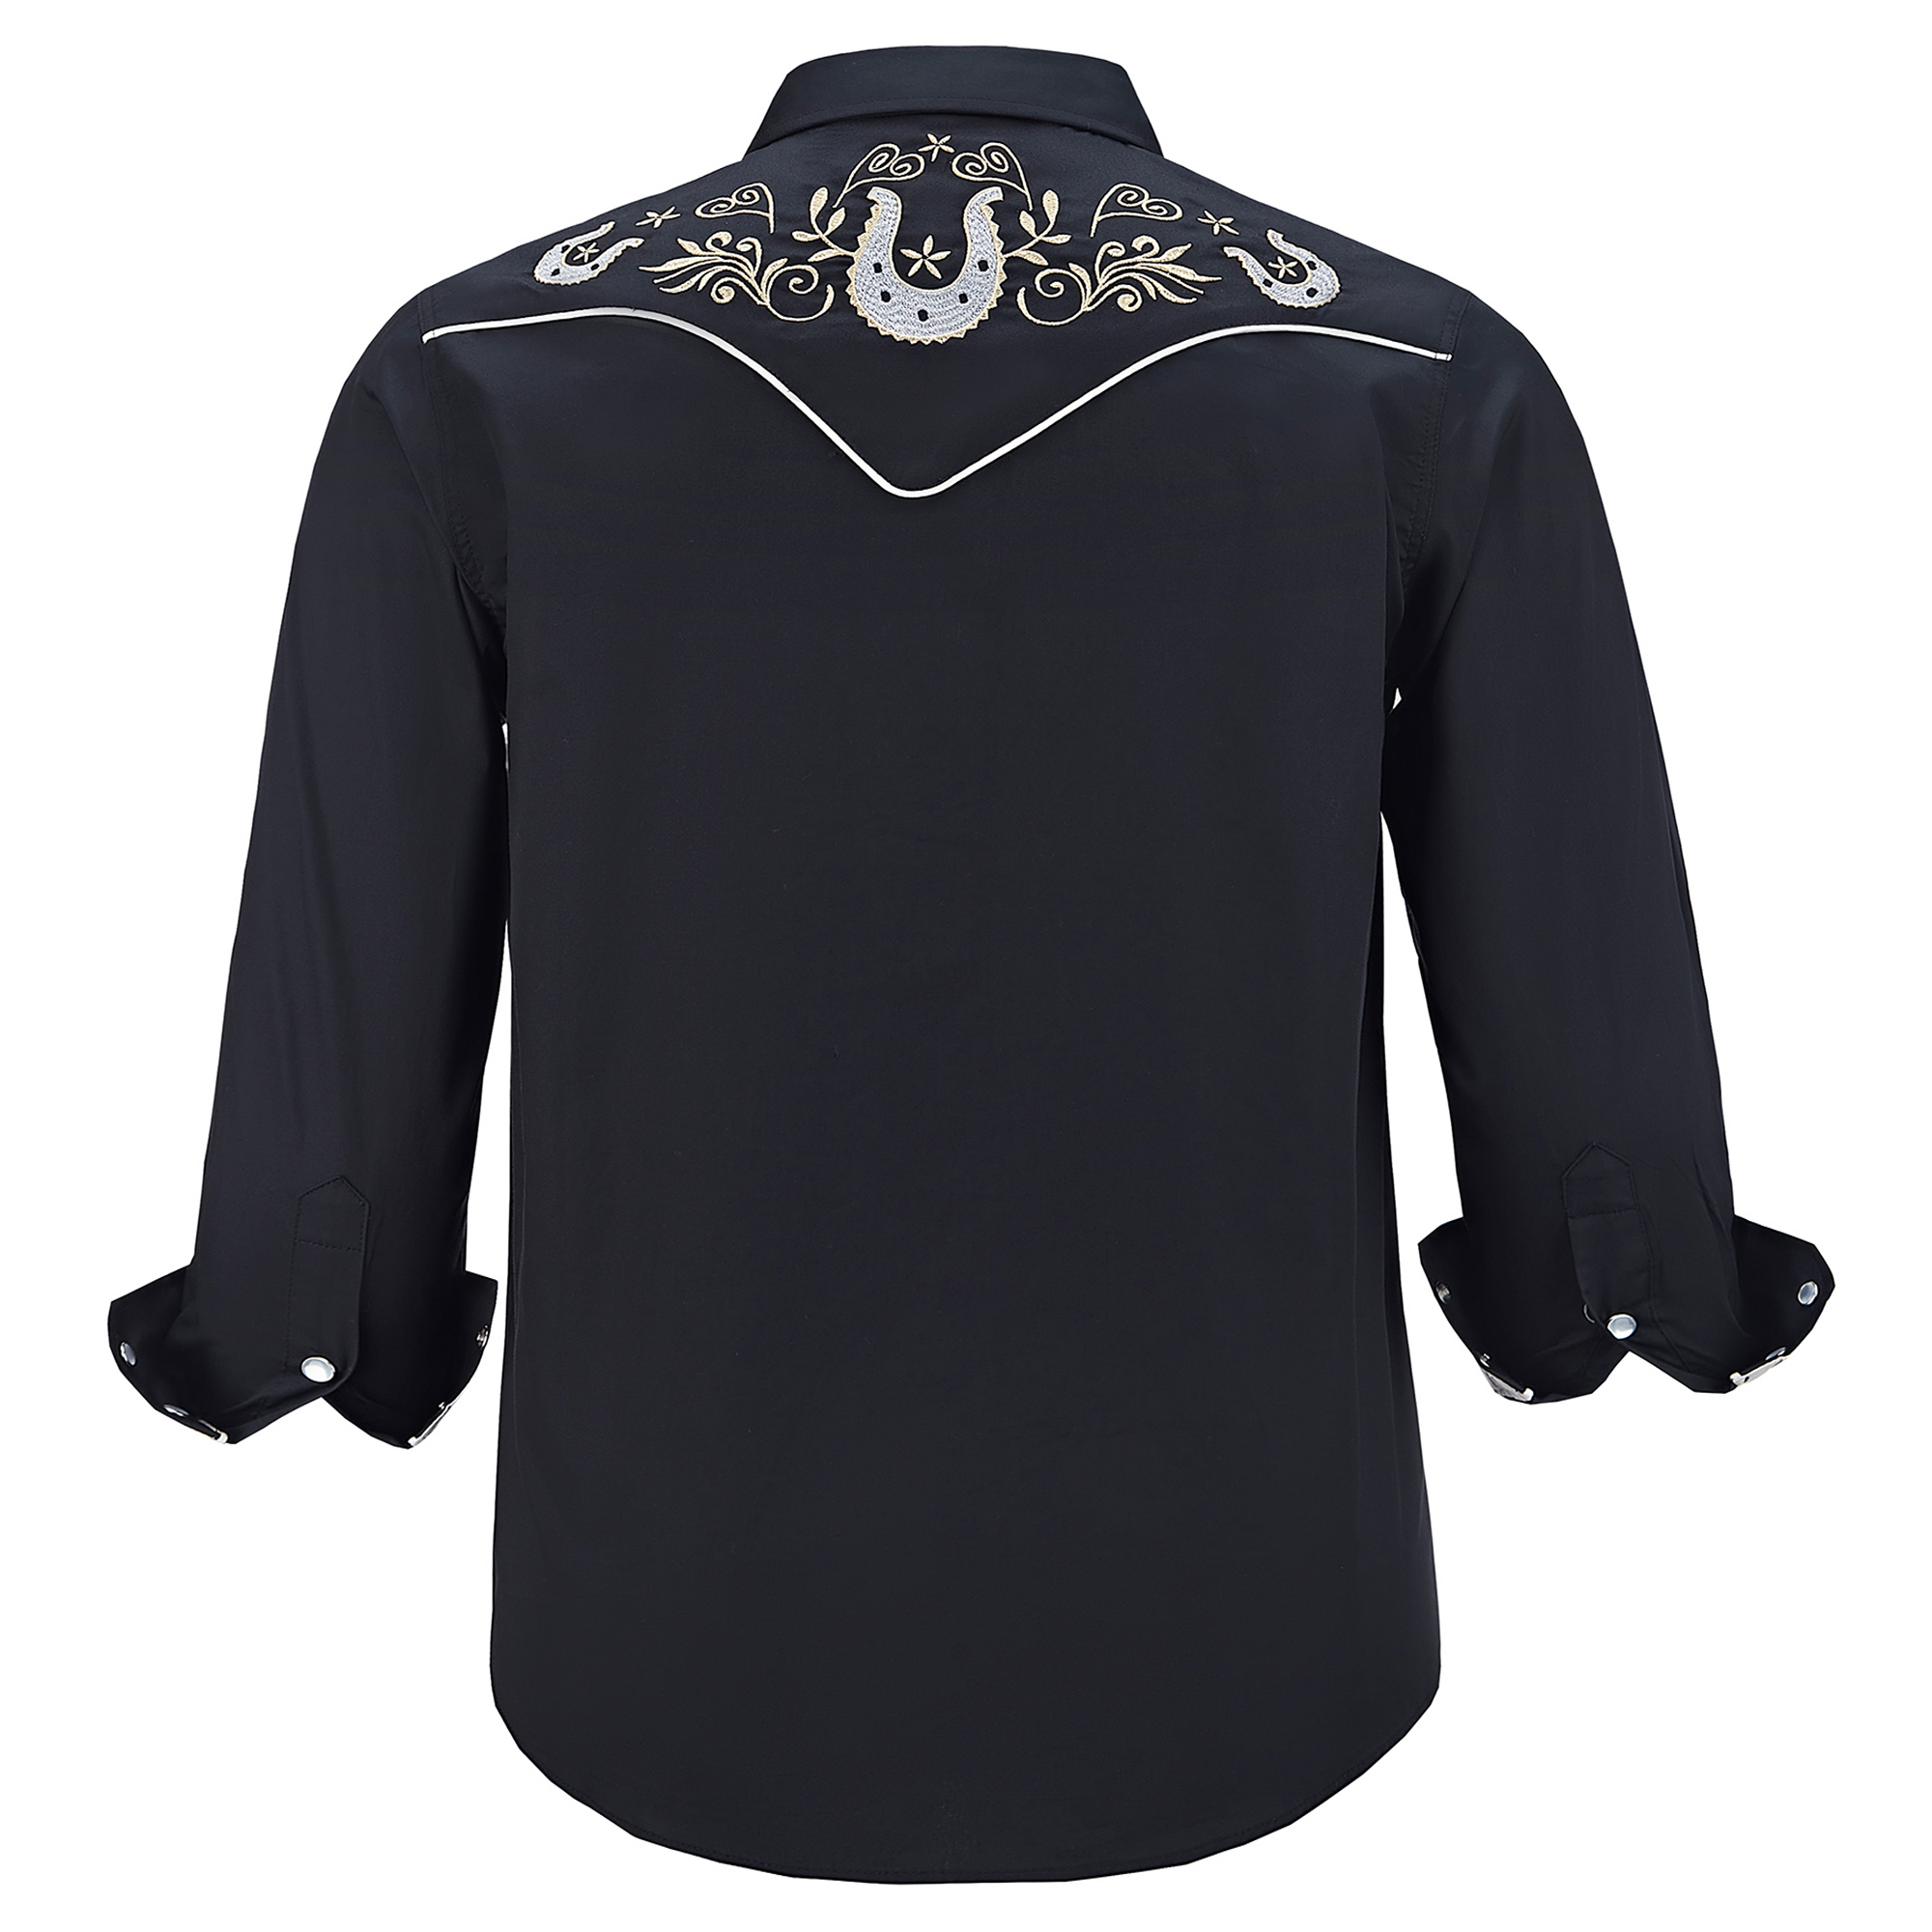 COEVALS CLUB Men's Western Cowboy Embroidered Shirts Long Sleeve Pearl ...